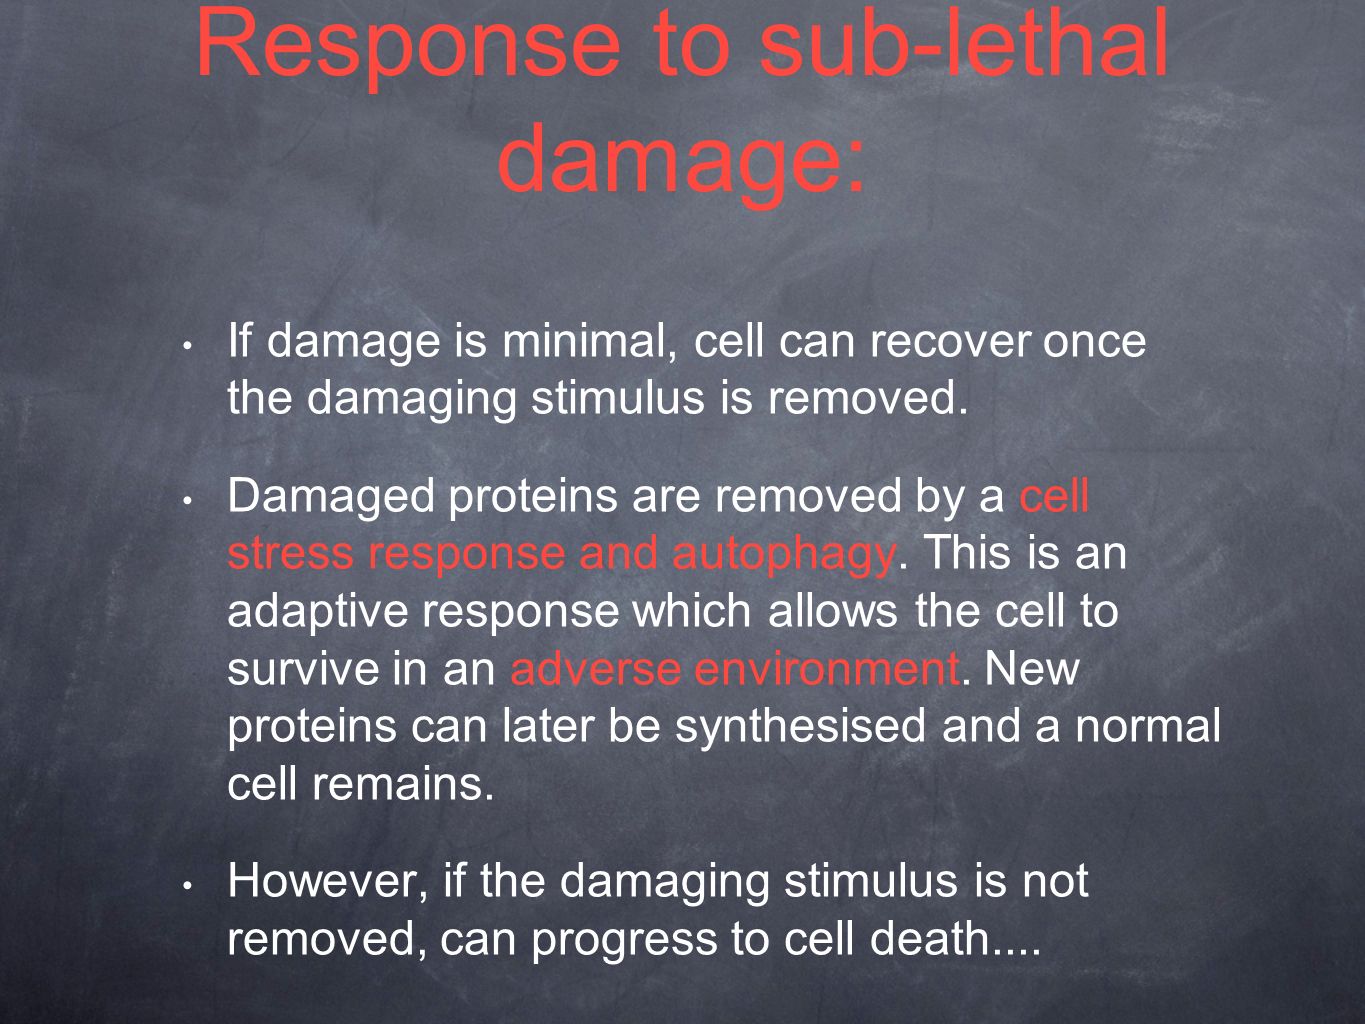 Response to sub-lethal damage: If damage is minimal, cell can recover once the damaging stimulus is removed.